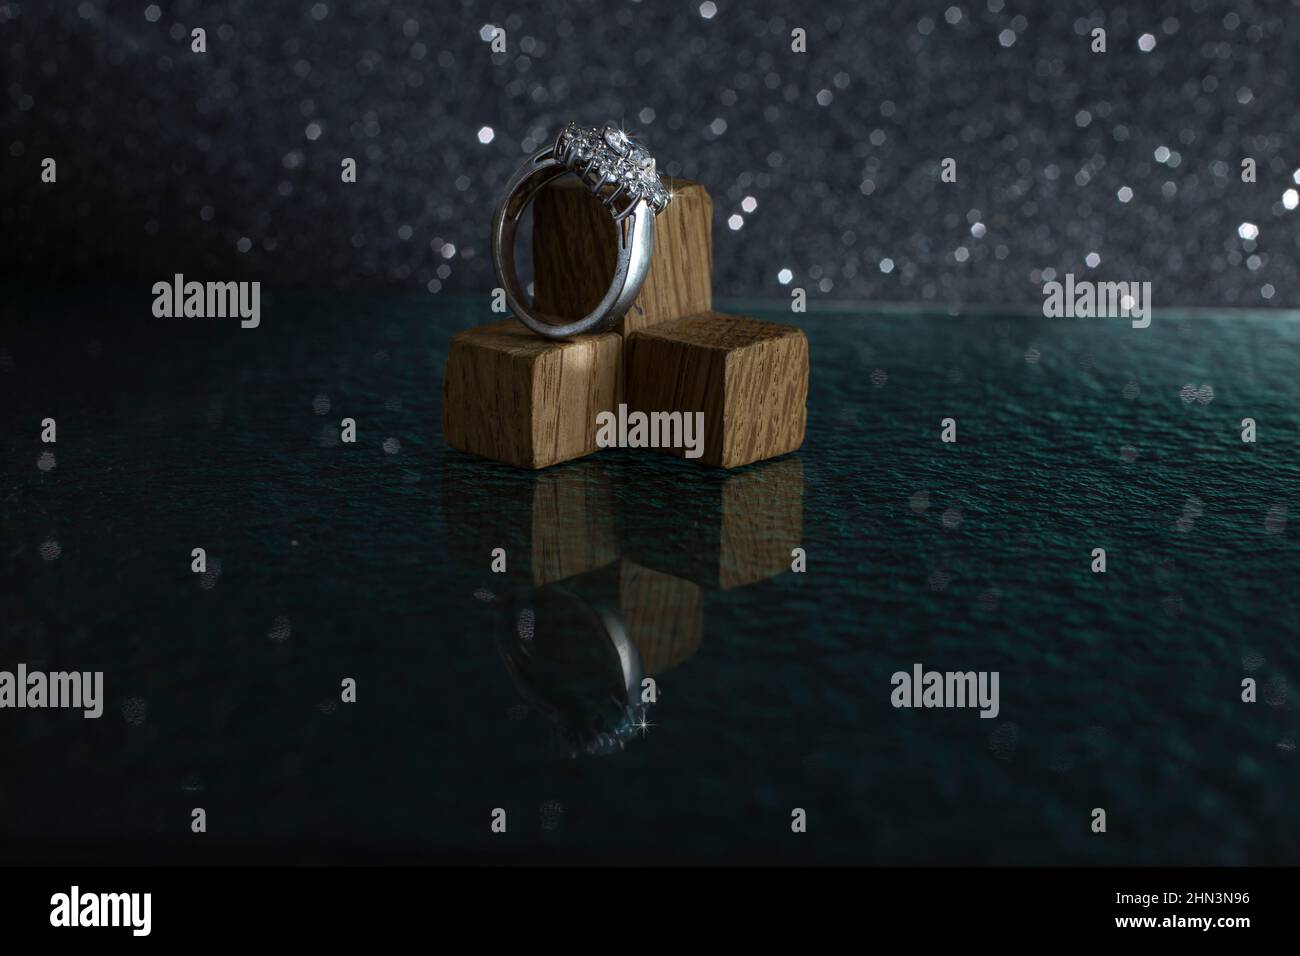 Diamond silver ring on little wood cubes, isolated on black background, with glass reflections Stock Photo